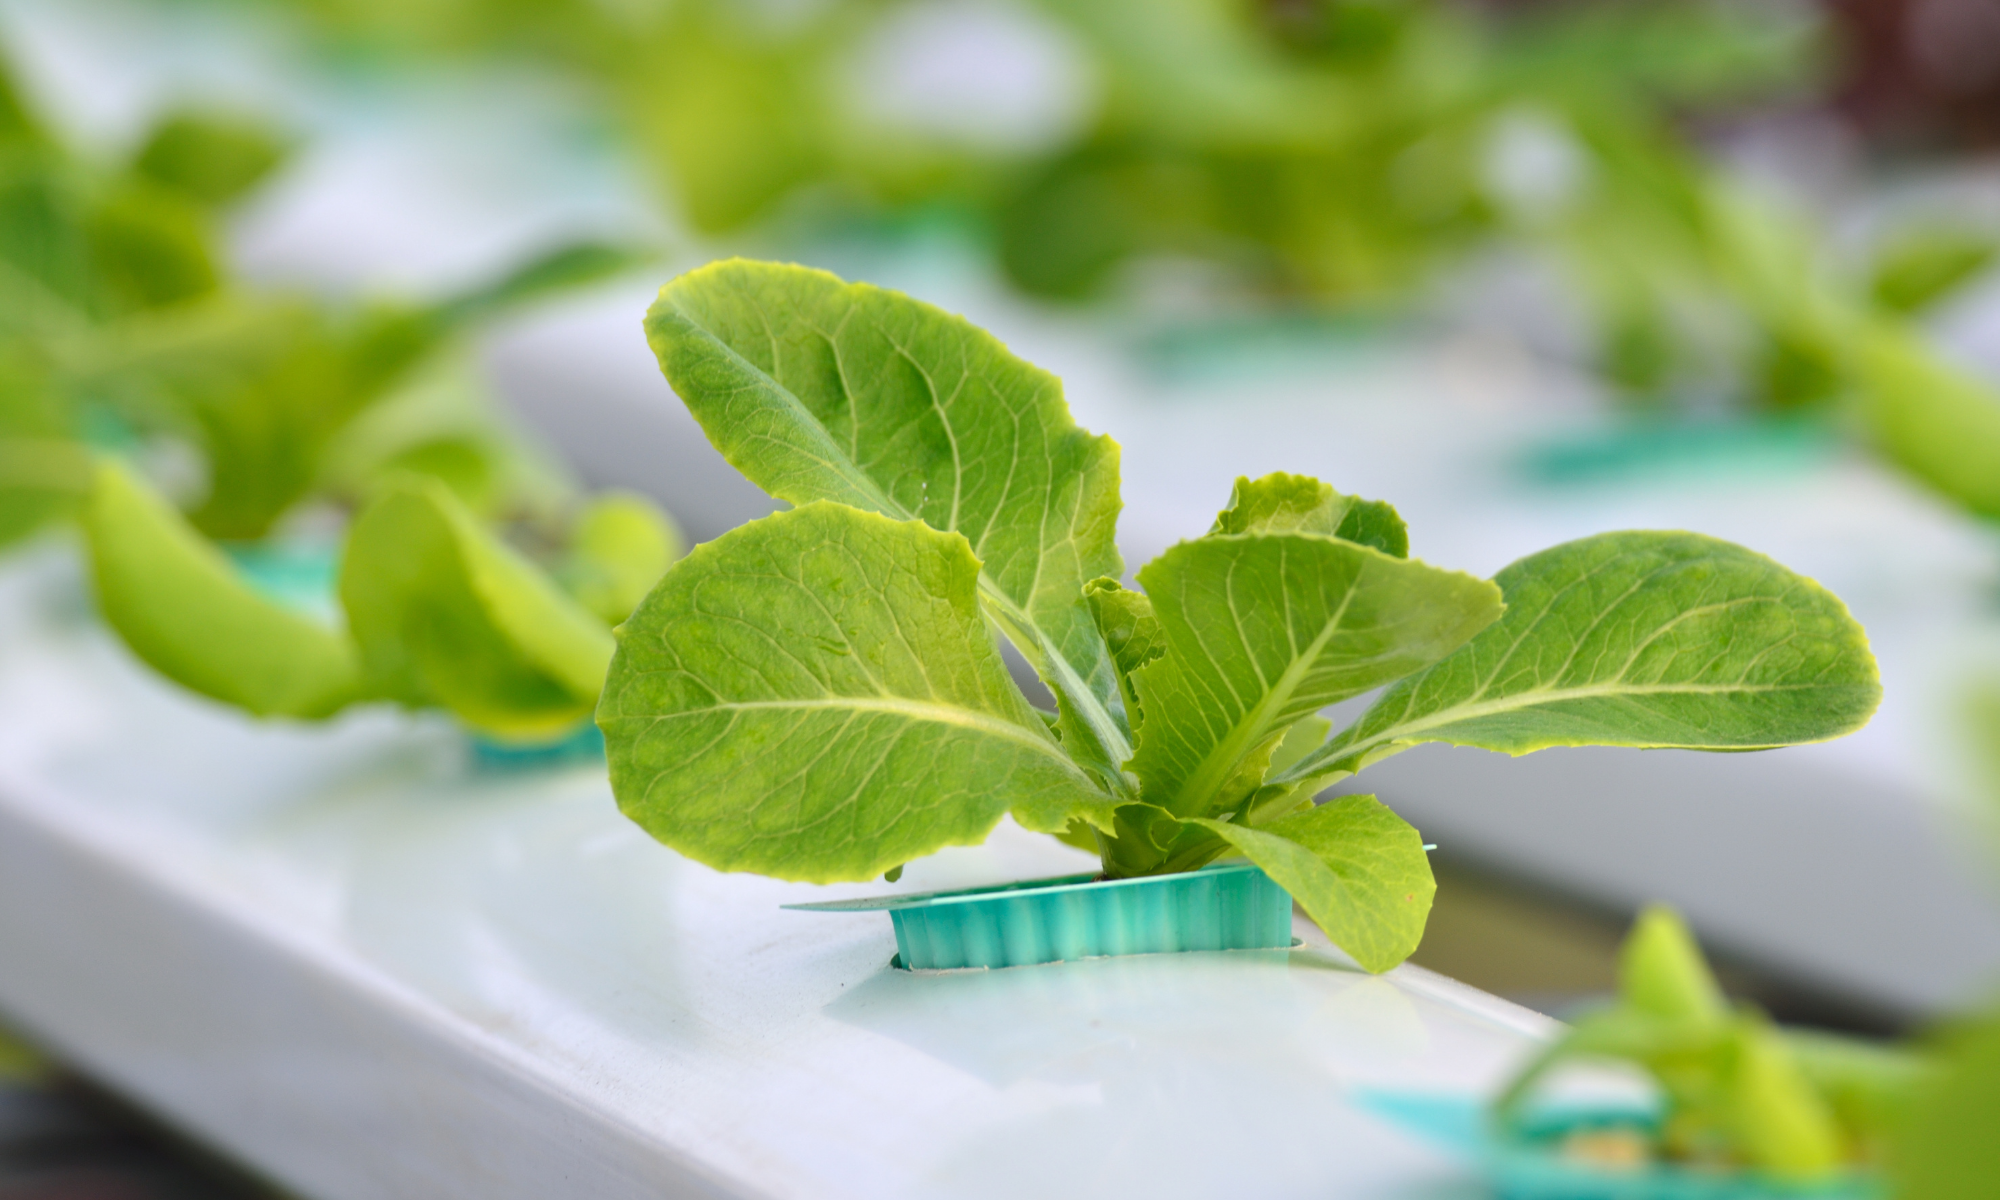 What Do You Feed Hydroponic Plants?